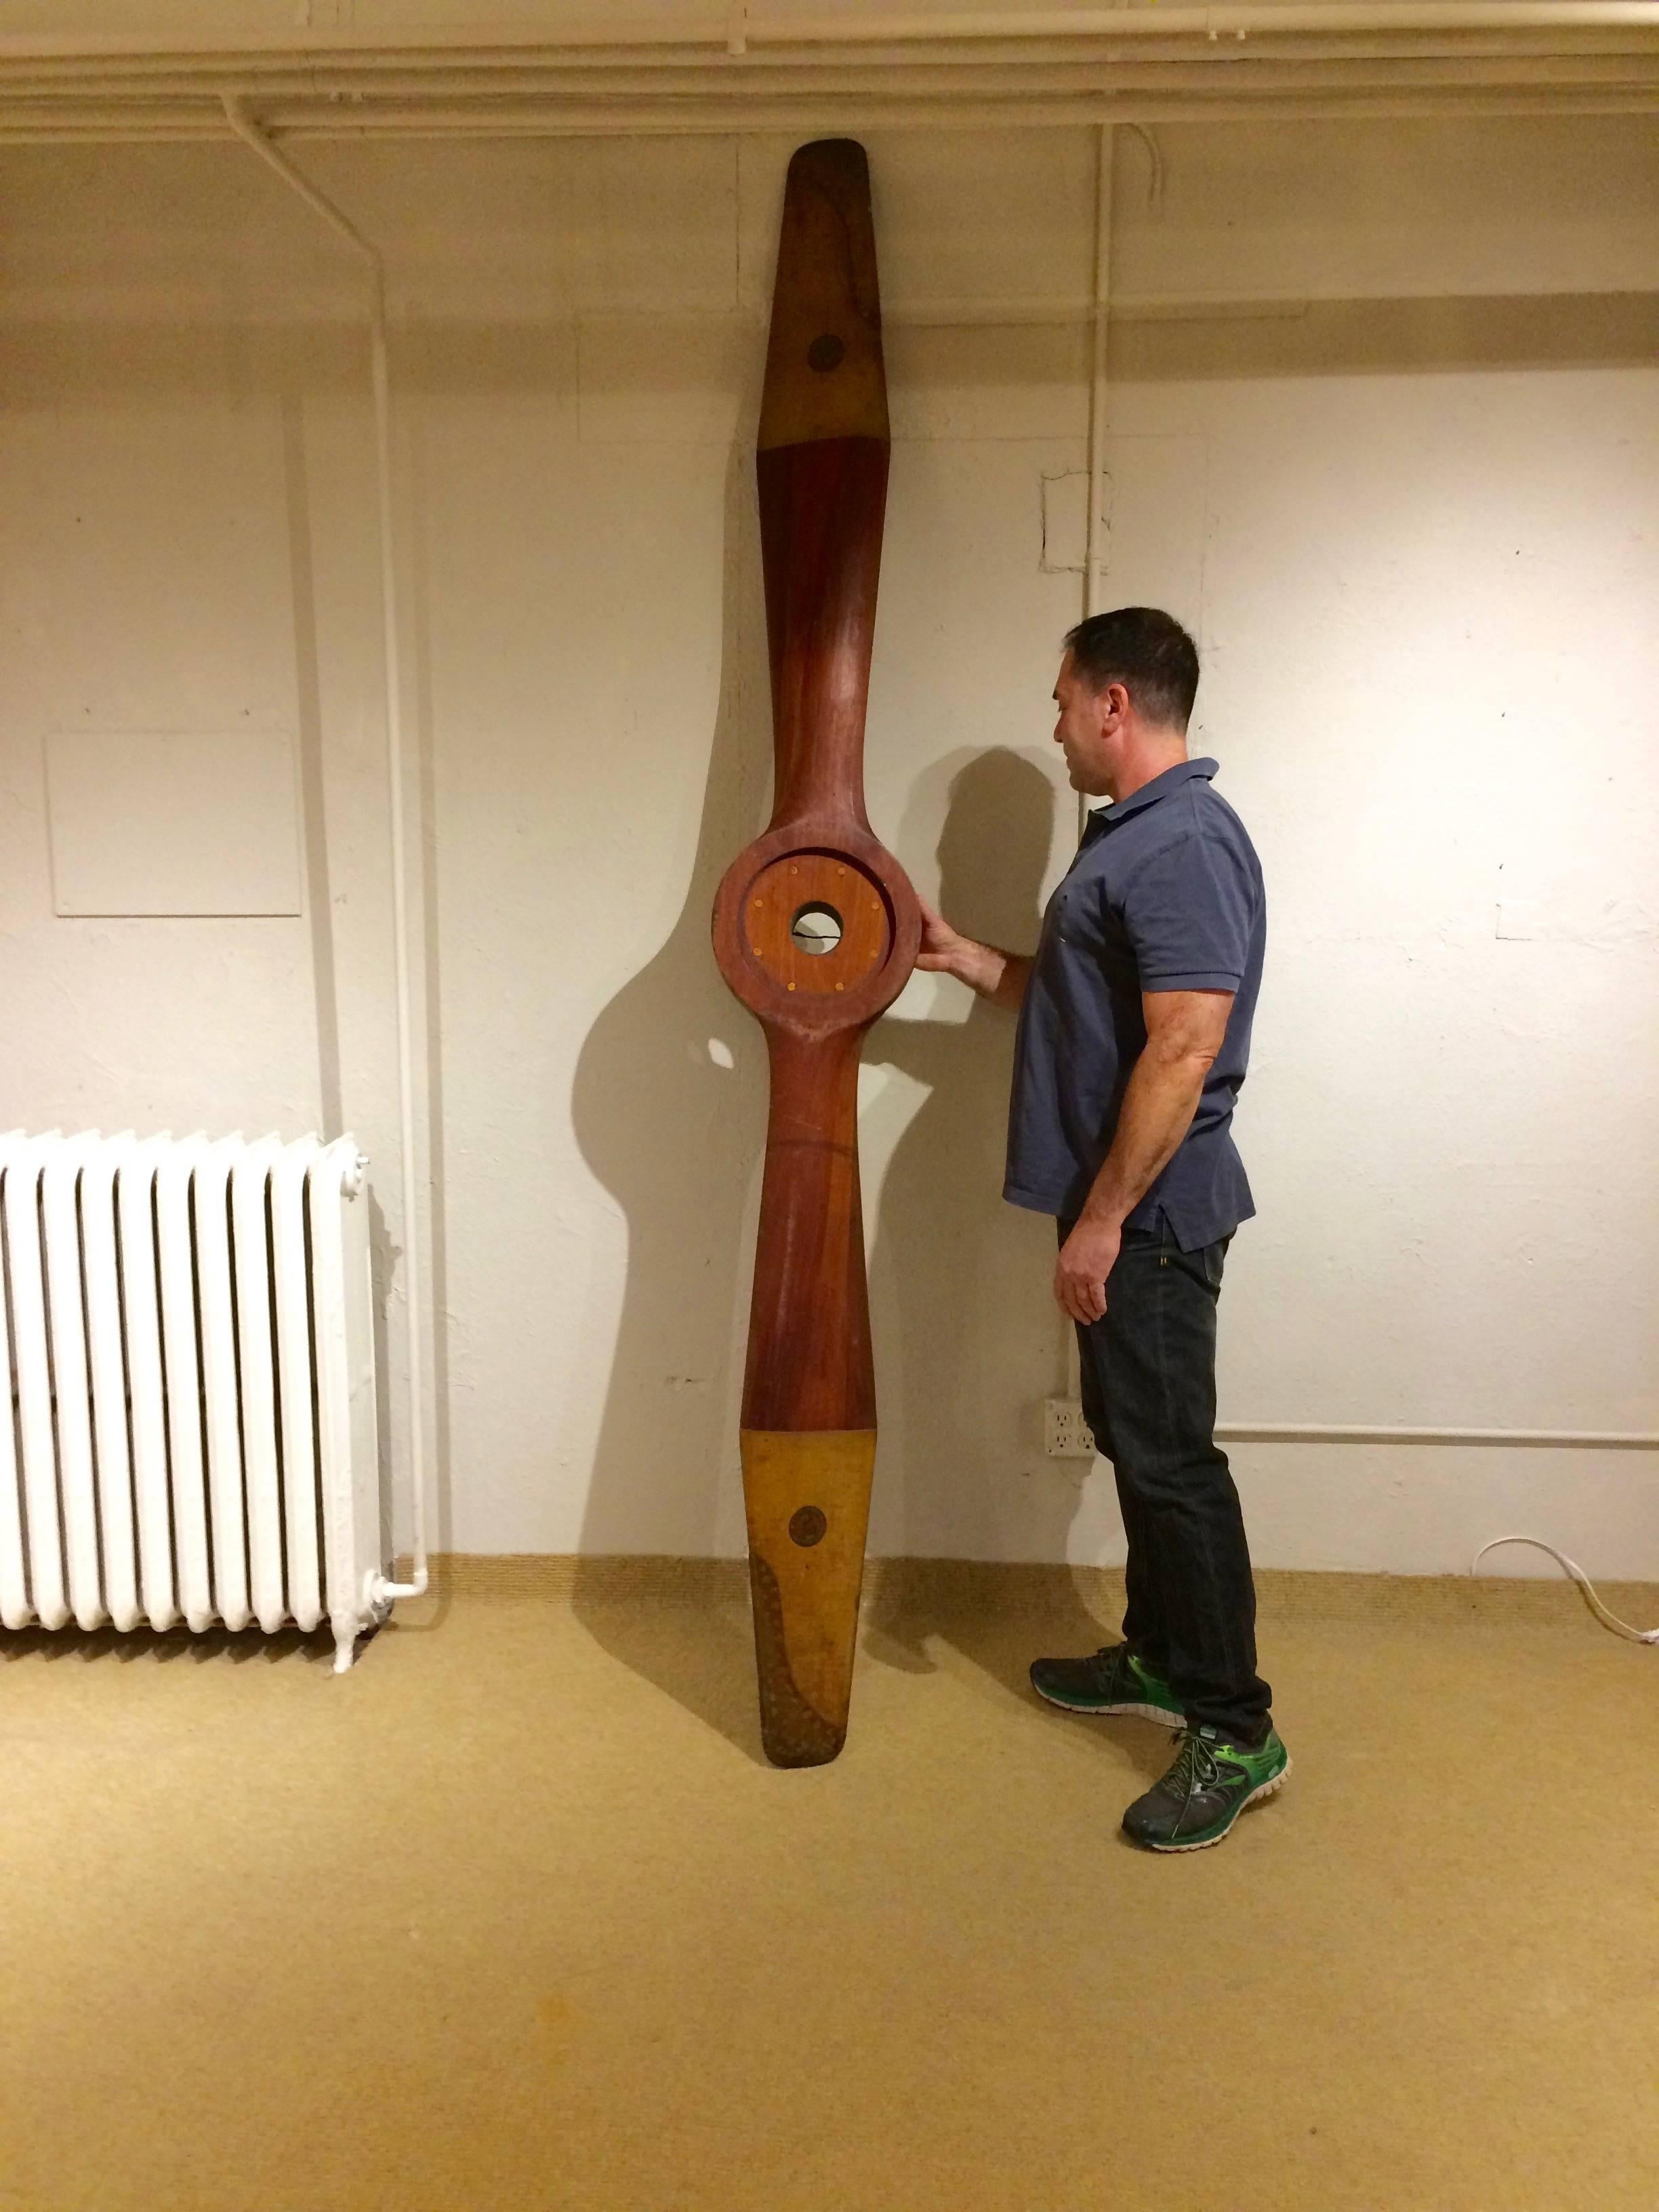 One of a kind enormous mahogany World War II navy plane propeller, sculptural as a found object to hang vertically or horizontally, with rich coloration and copper clad tips, as well as original Unit Construction Co. emblems and engraved serial